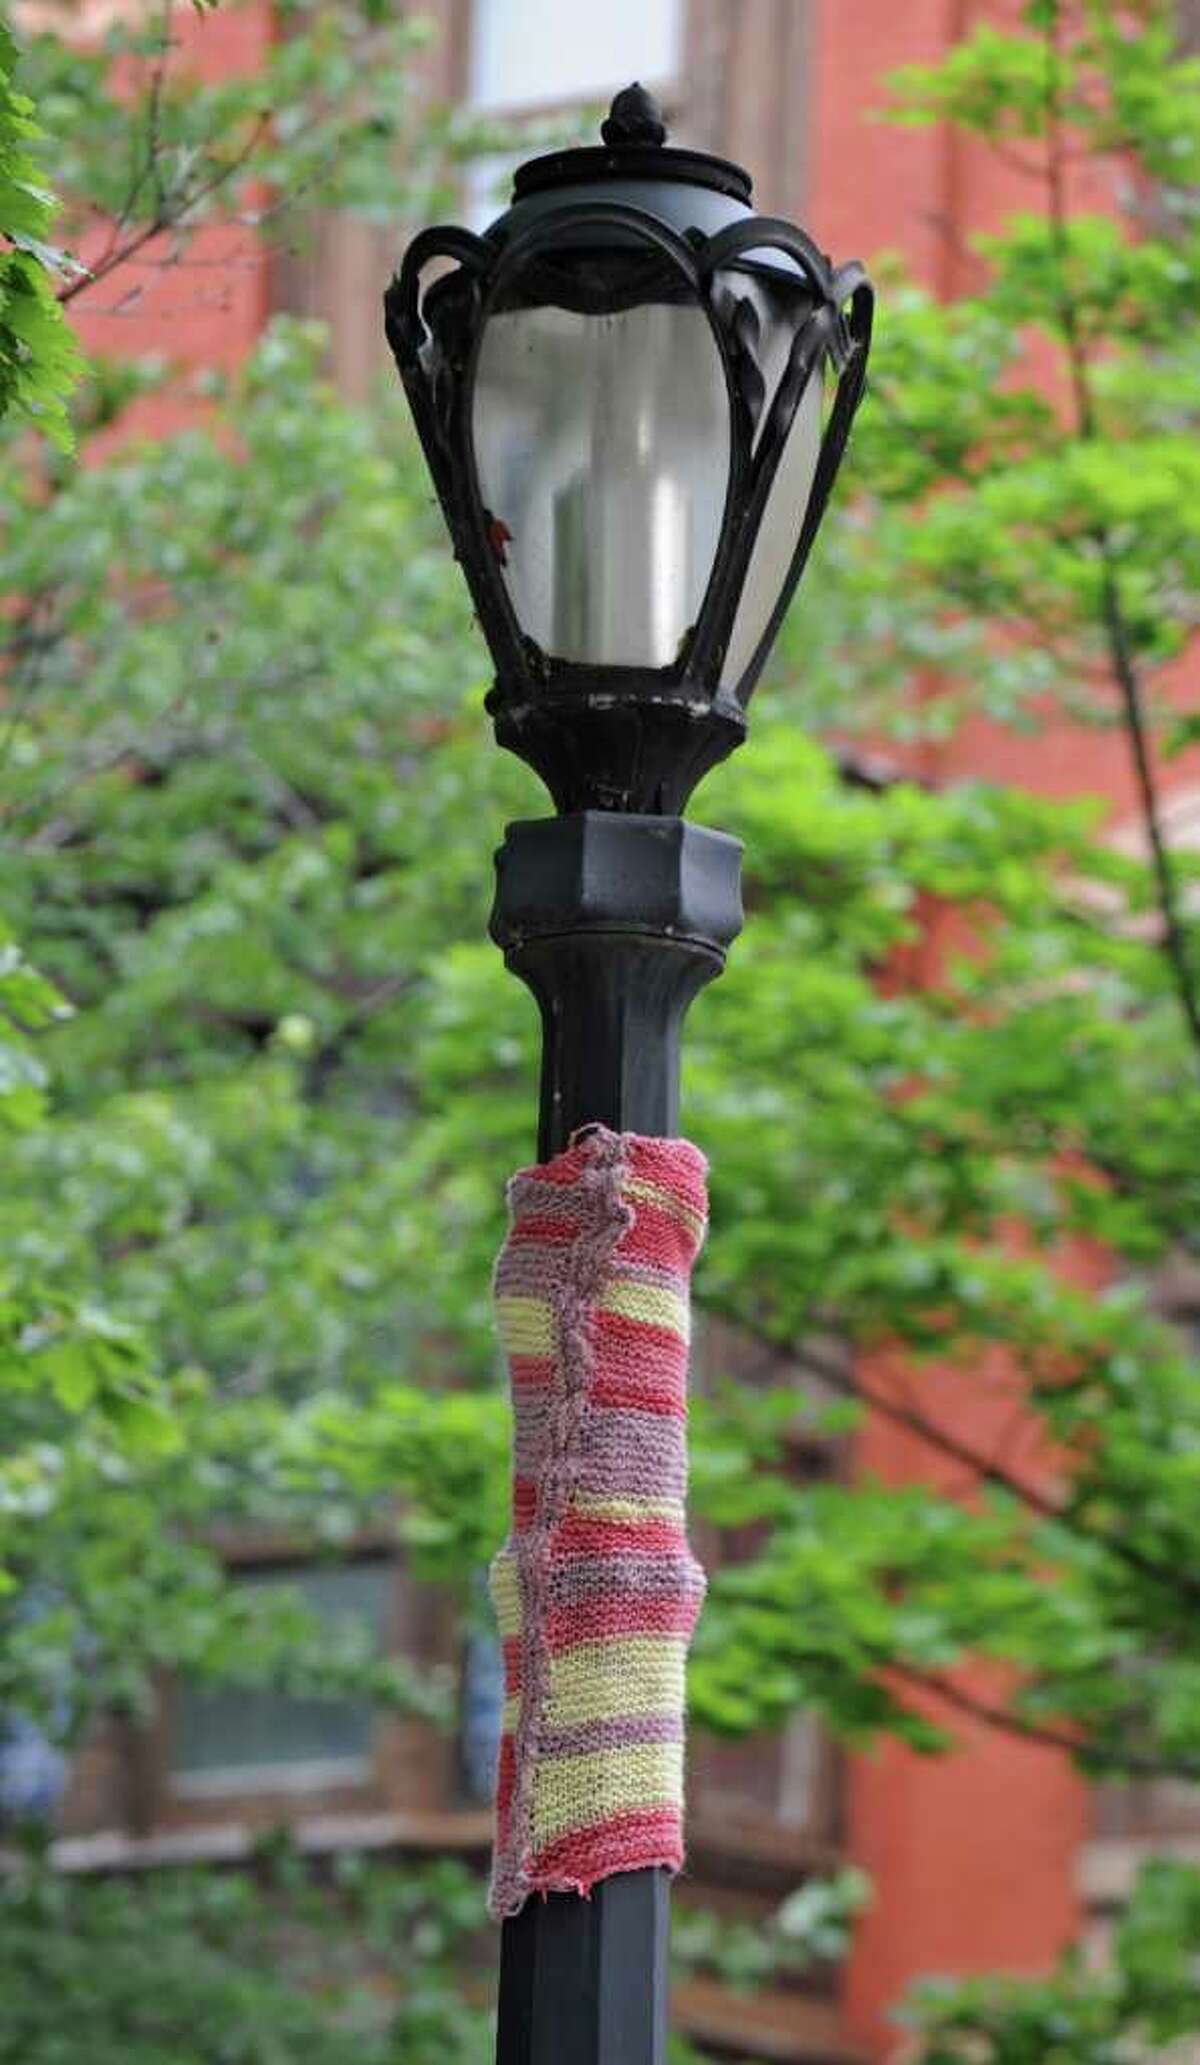 At the corner of 3rd Street and Washington Place, a "Yarn Bomber" has created a multi colored, knitted "cozy" covering part of the antique style light post in Troy, N.Y. Tuesday June 14, 2011. (Lori Van Buren / Times Union)